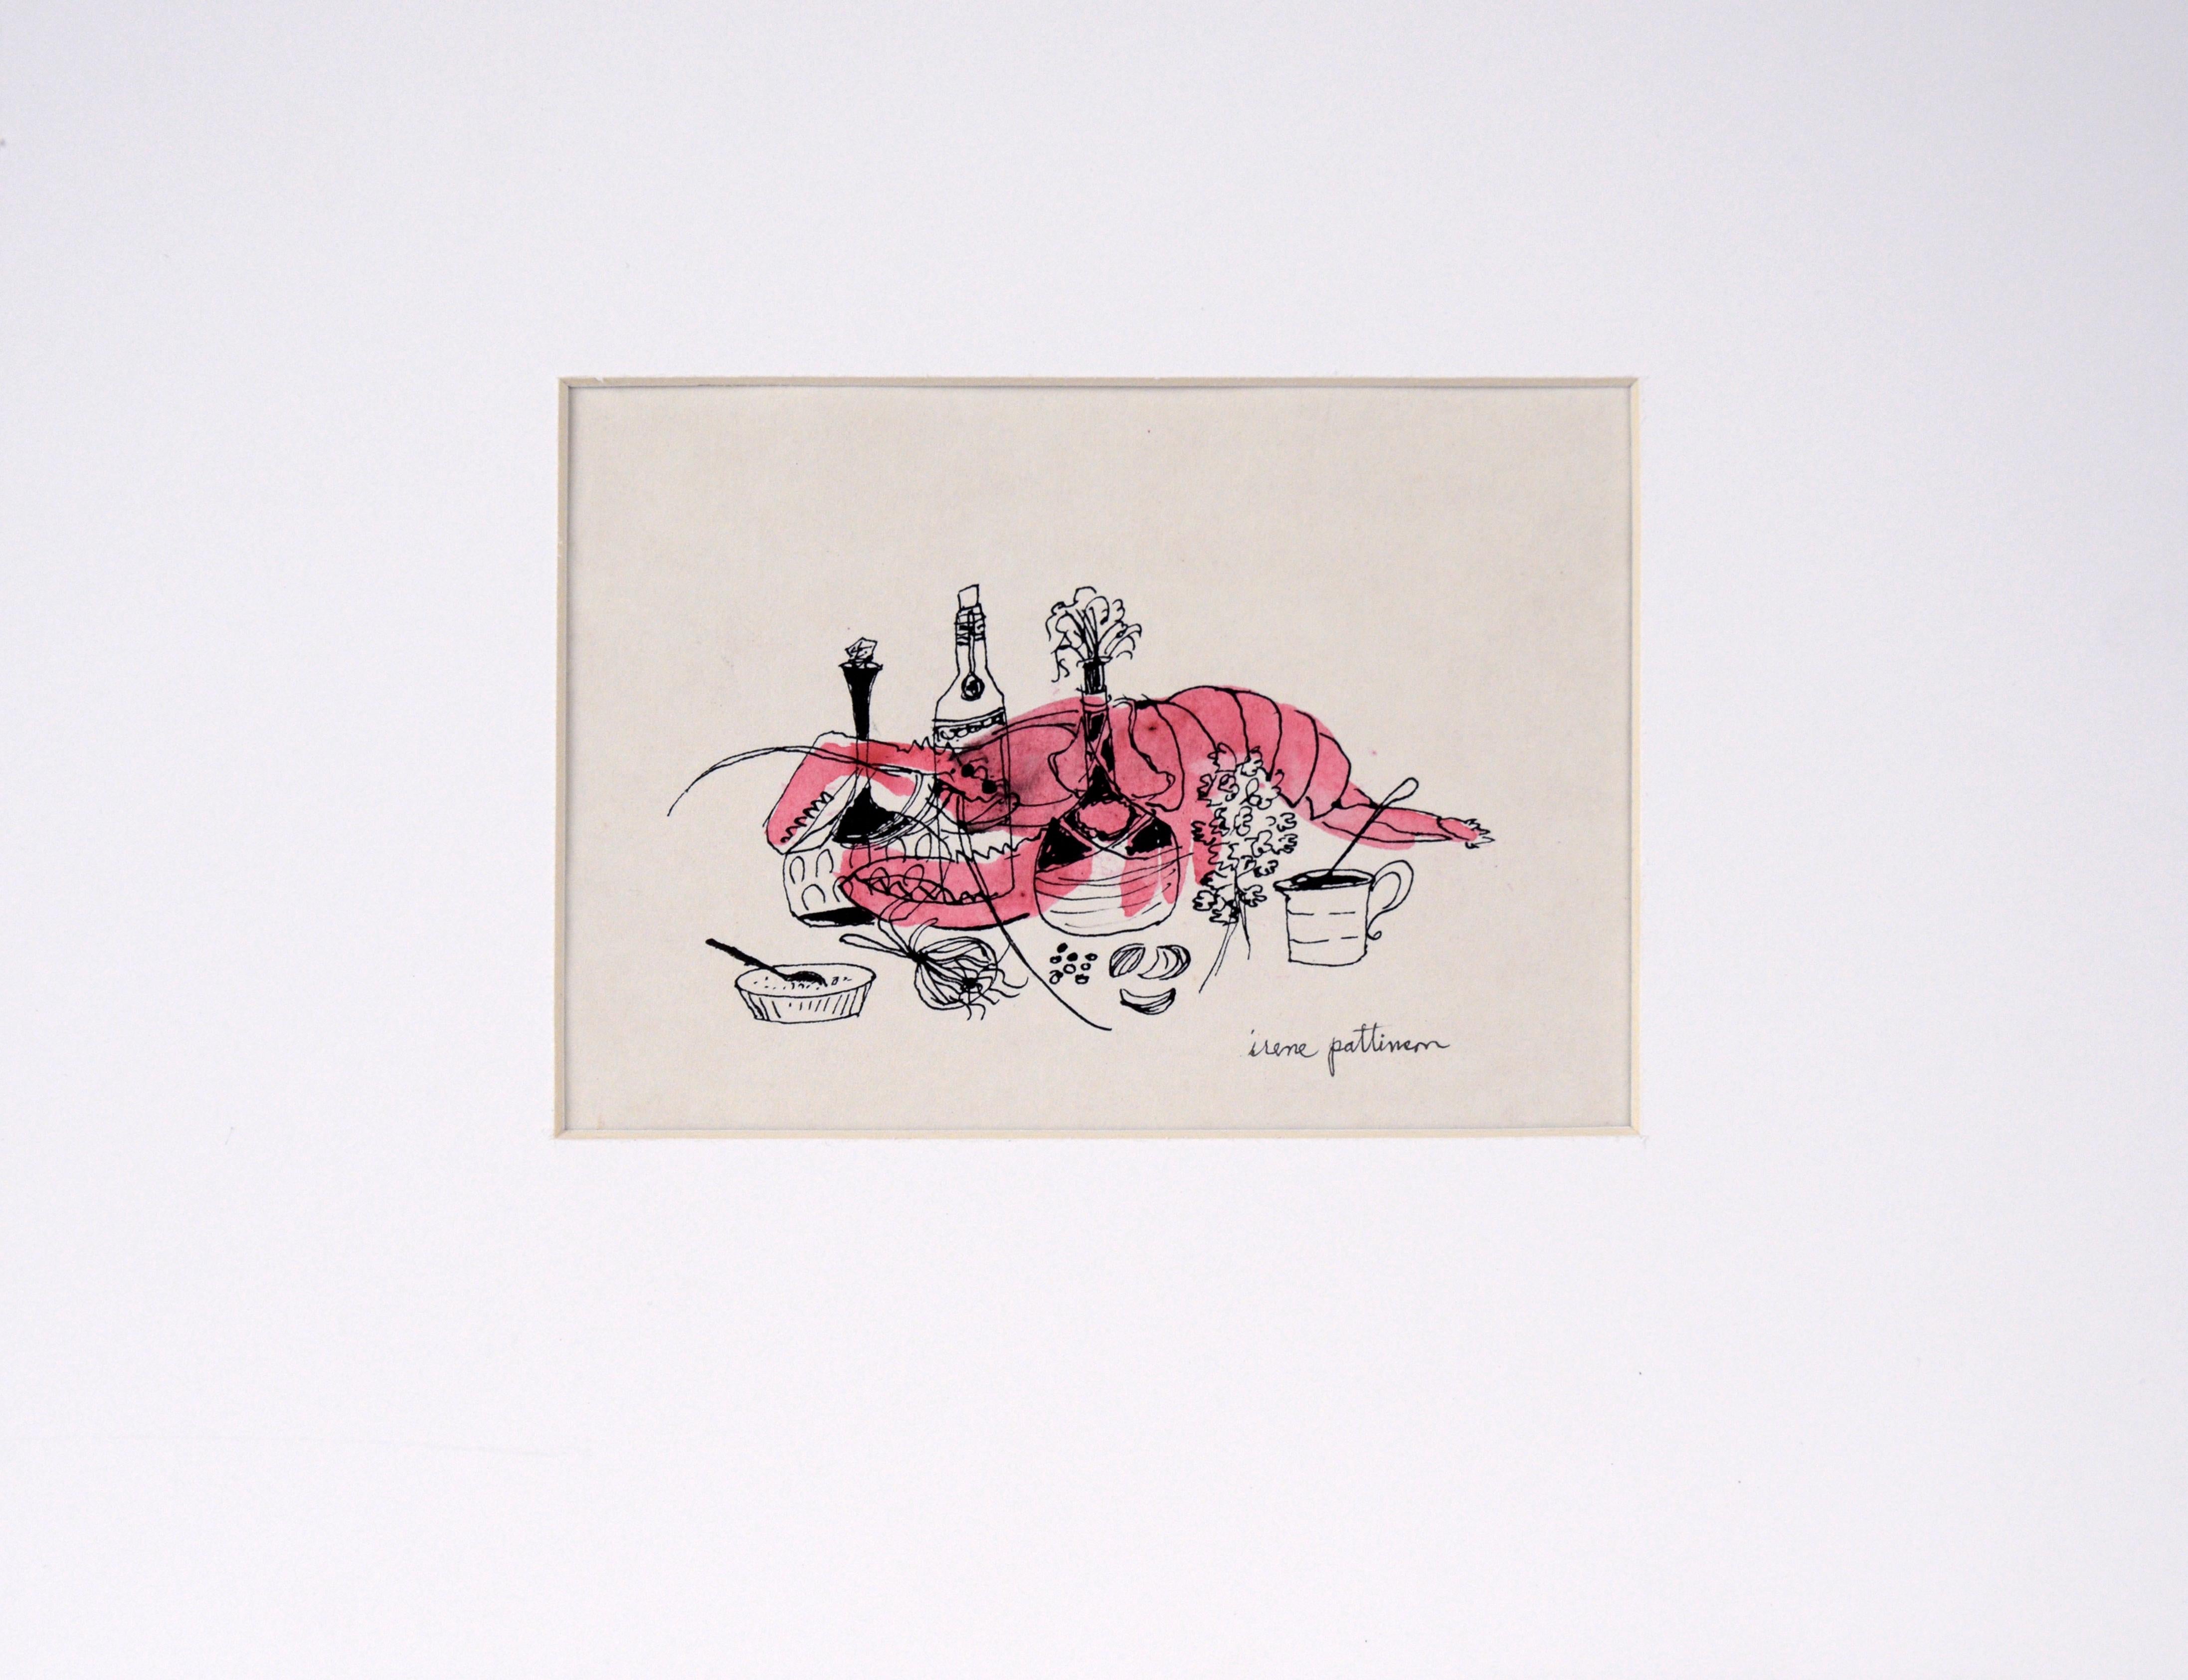 Irene Pattinson Animal Art - Chef Lobster - Vintage Illustration in Ink and Watercolor